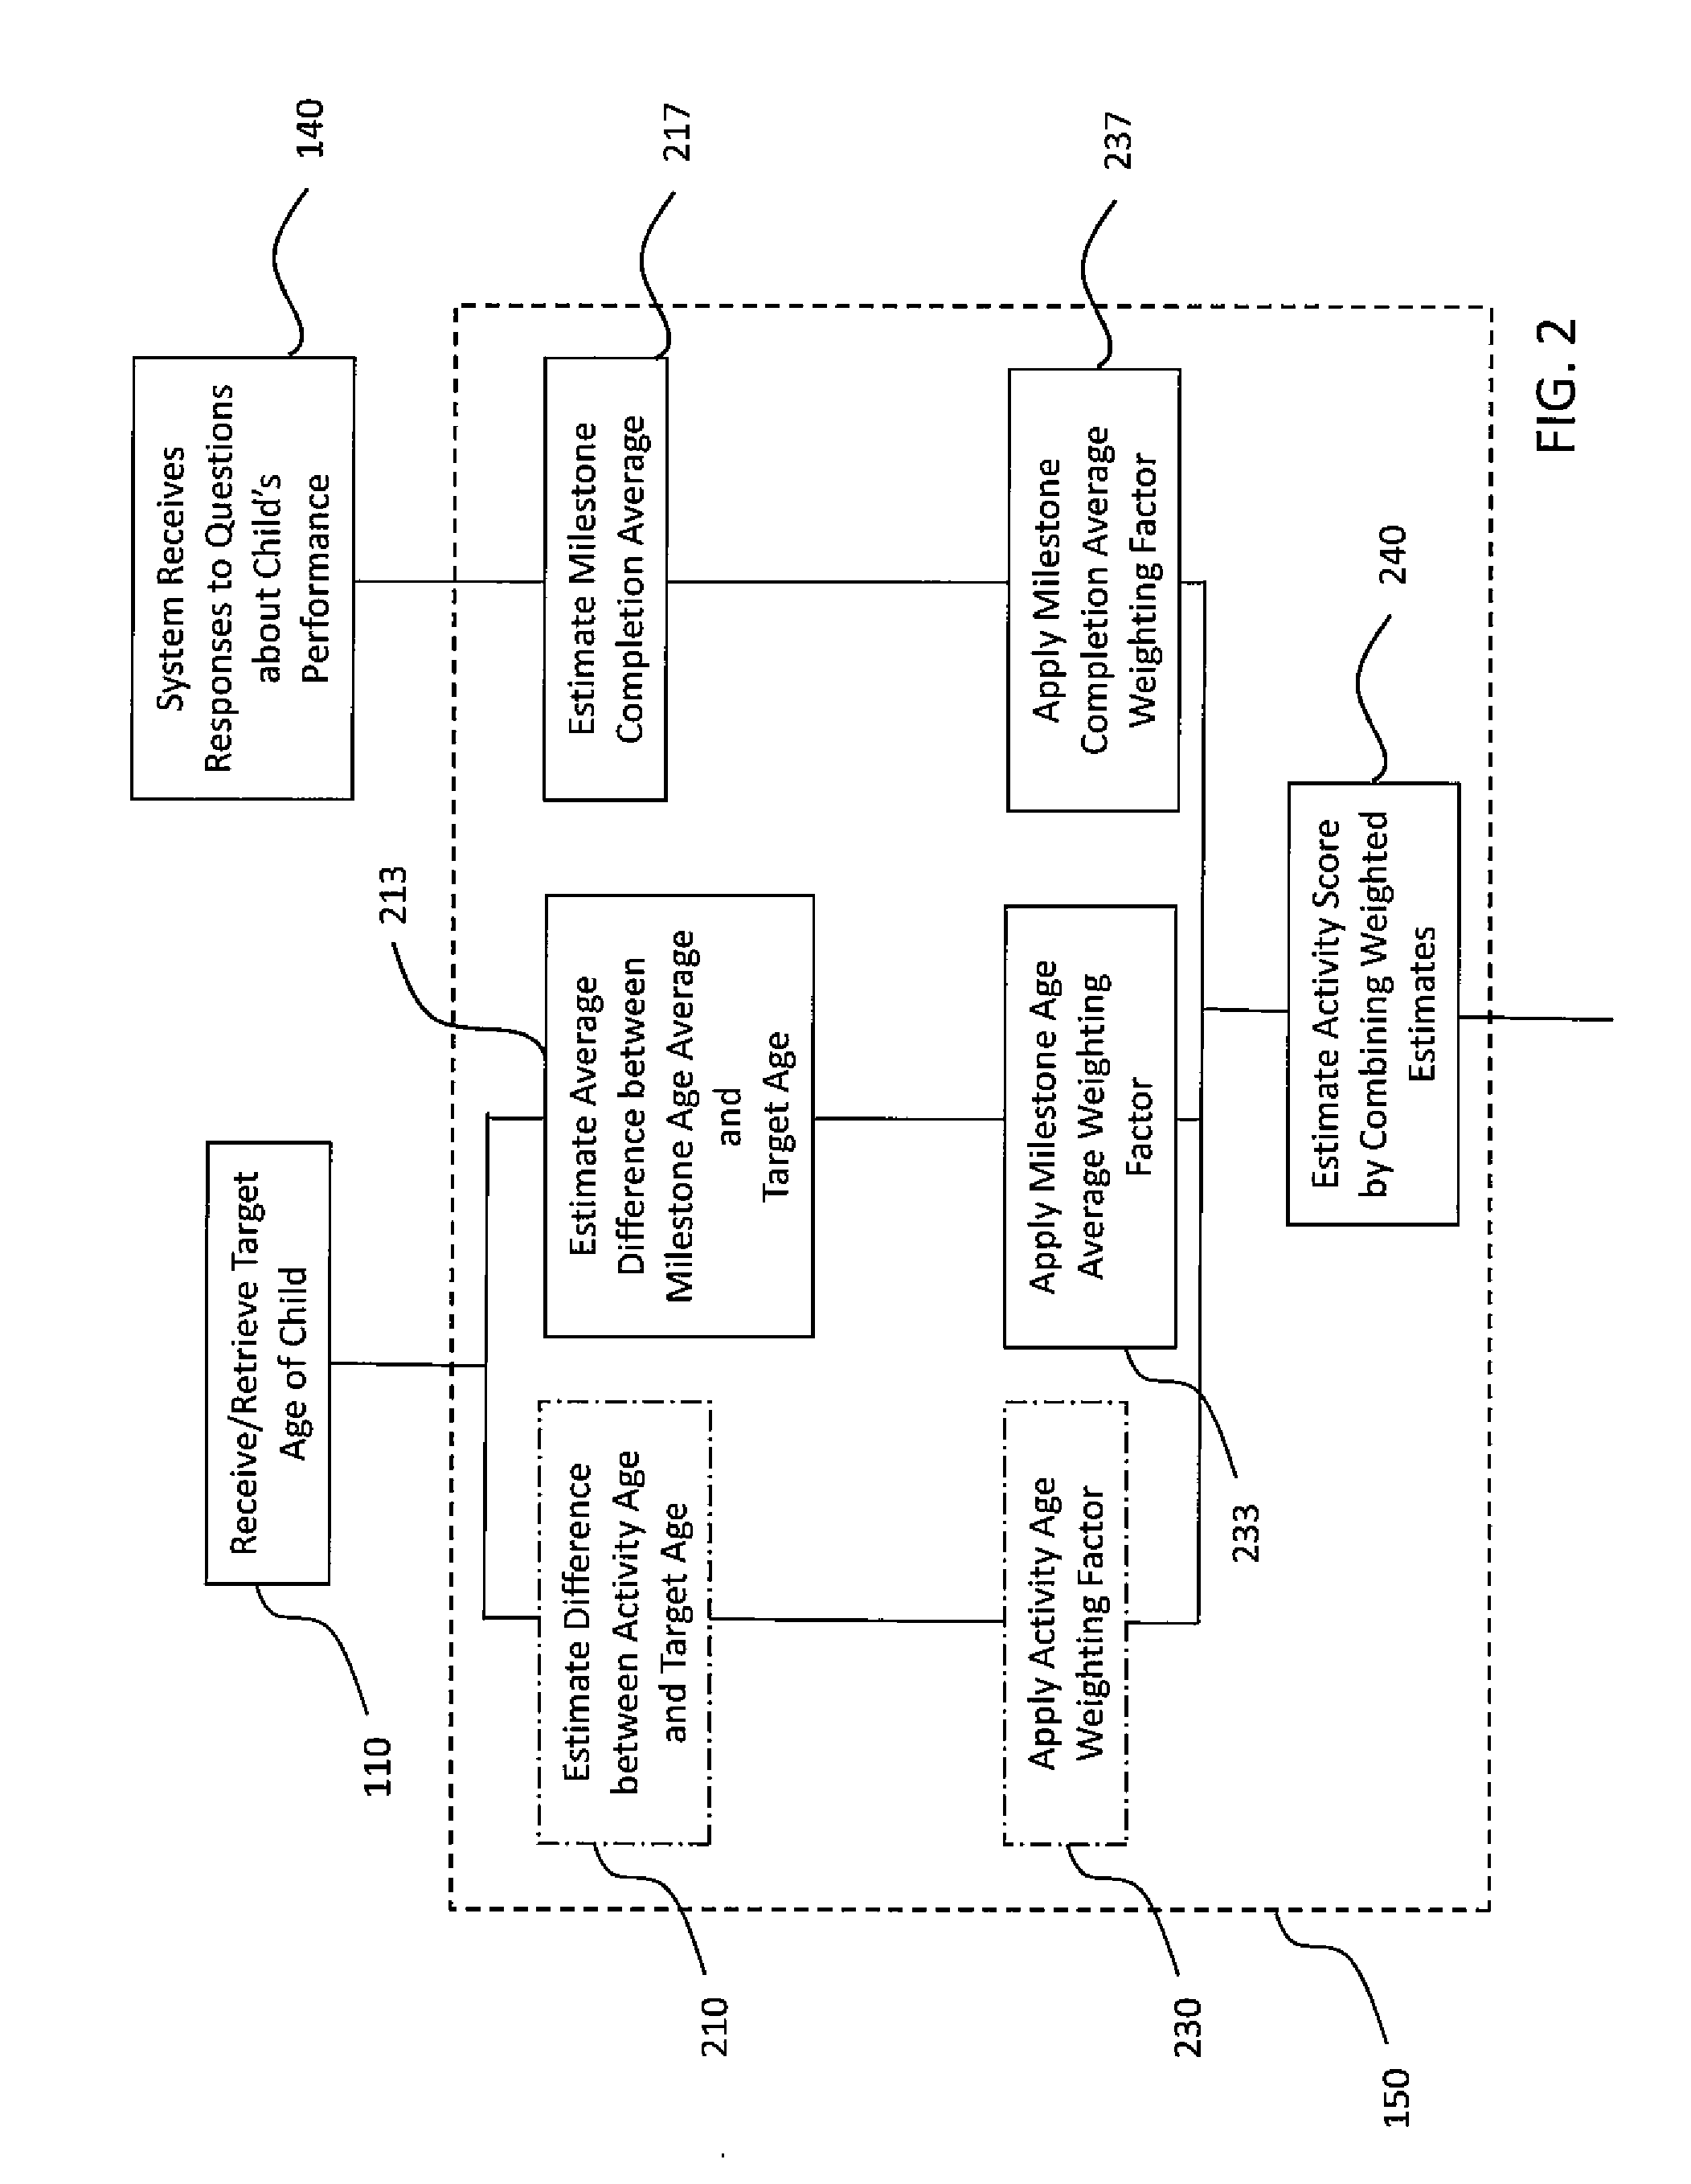 Method and system of activity selection for early childhood development